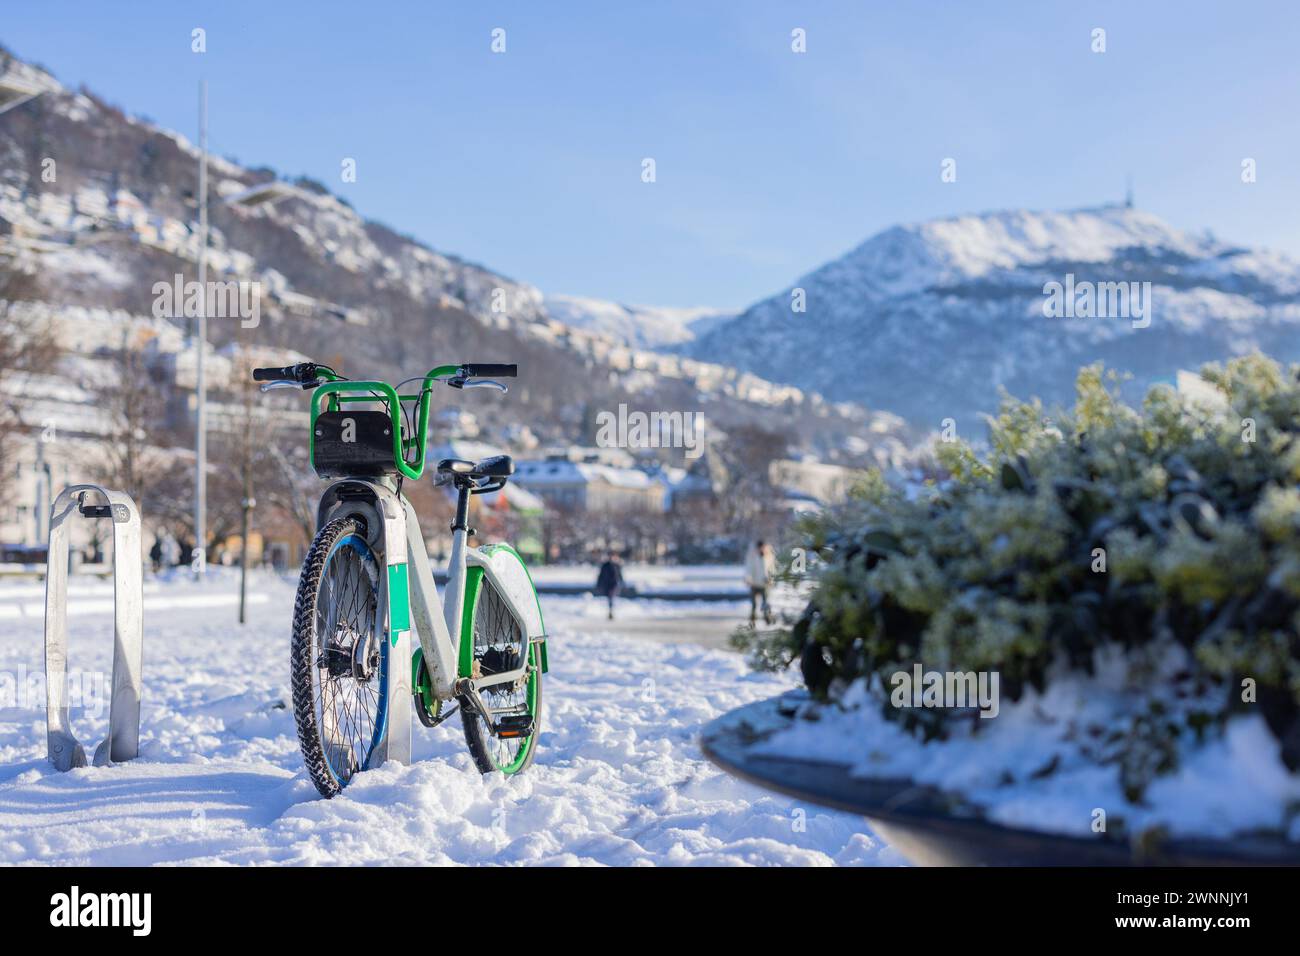 Rental bikes in Bergen, Norway on a sunny winter day. Rental bike stand covered and surrounded by snow. Close to the lake in central Bergen, single bi Stock Photo